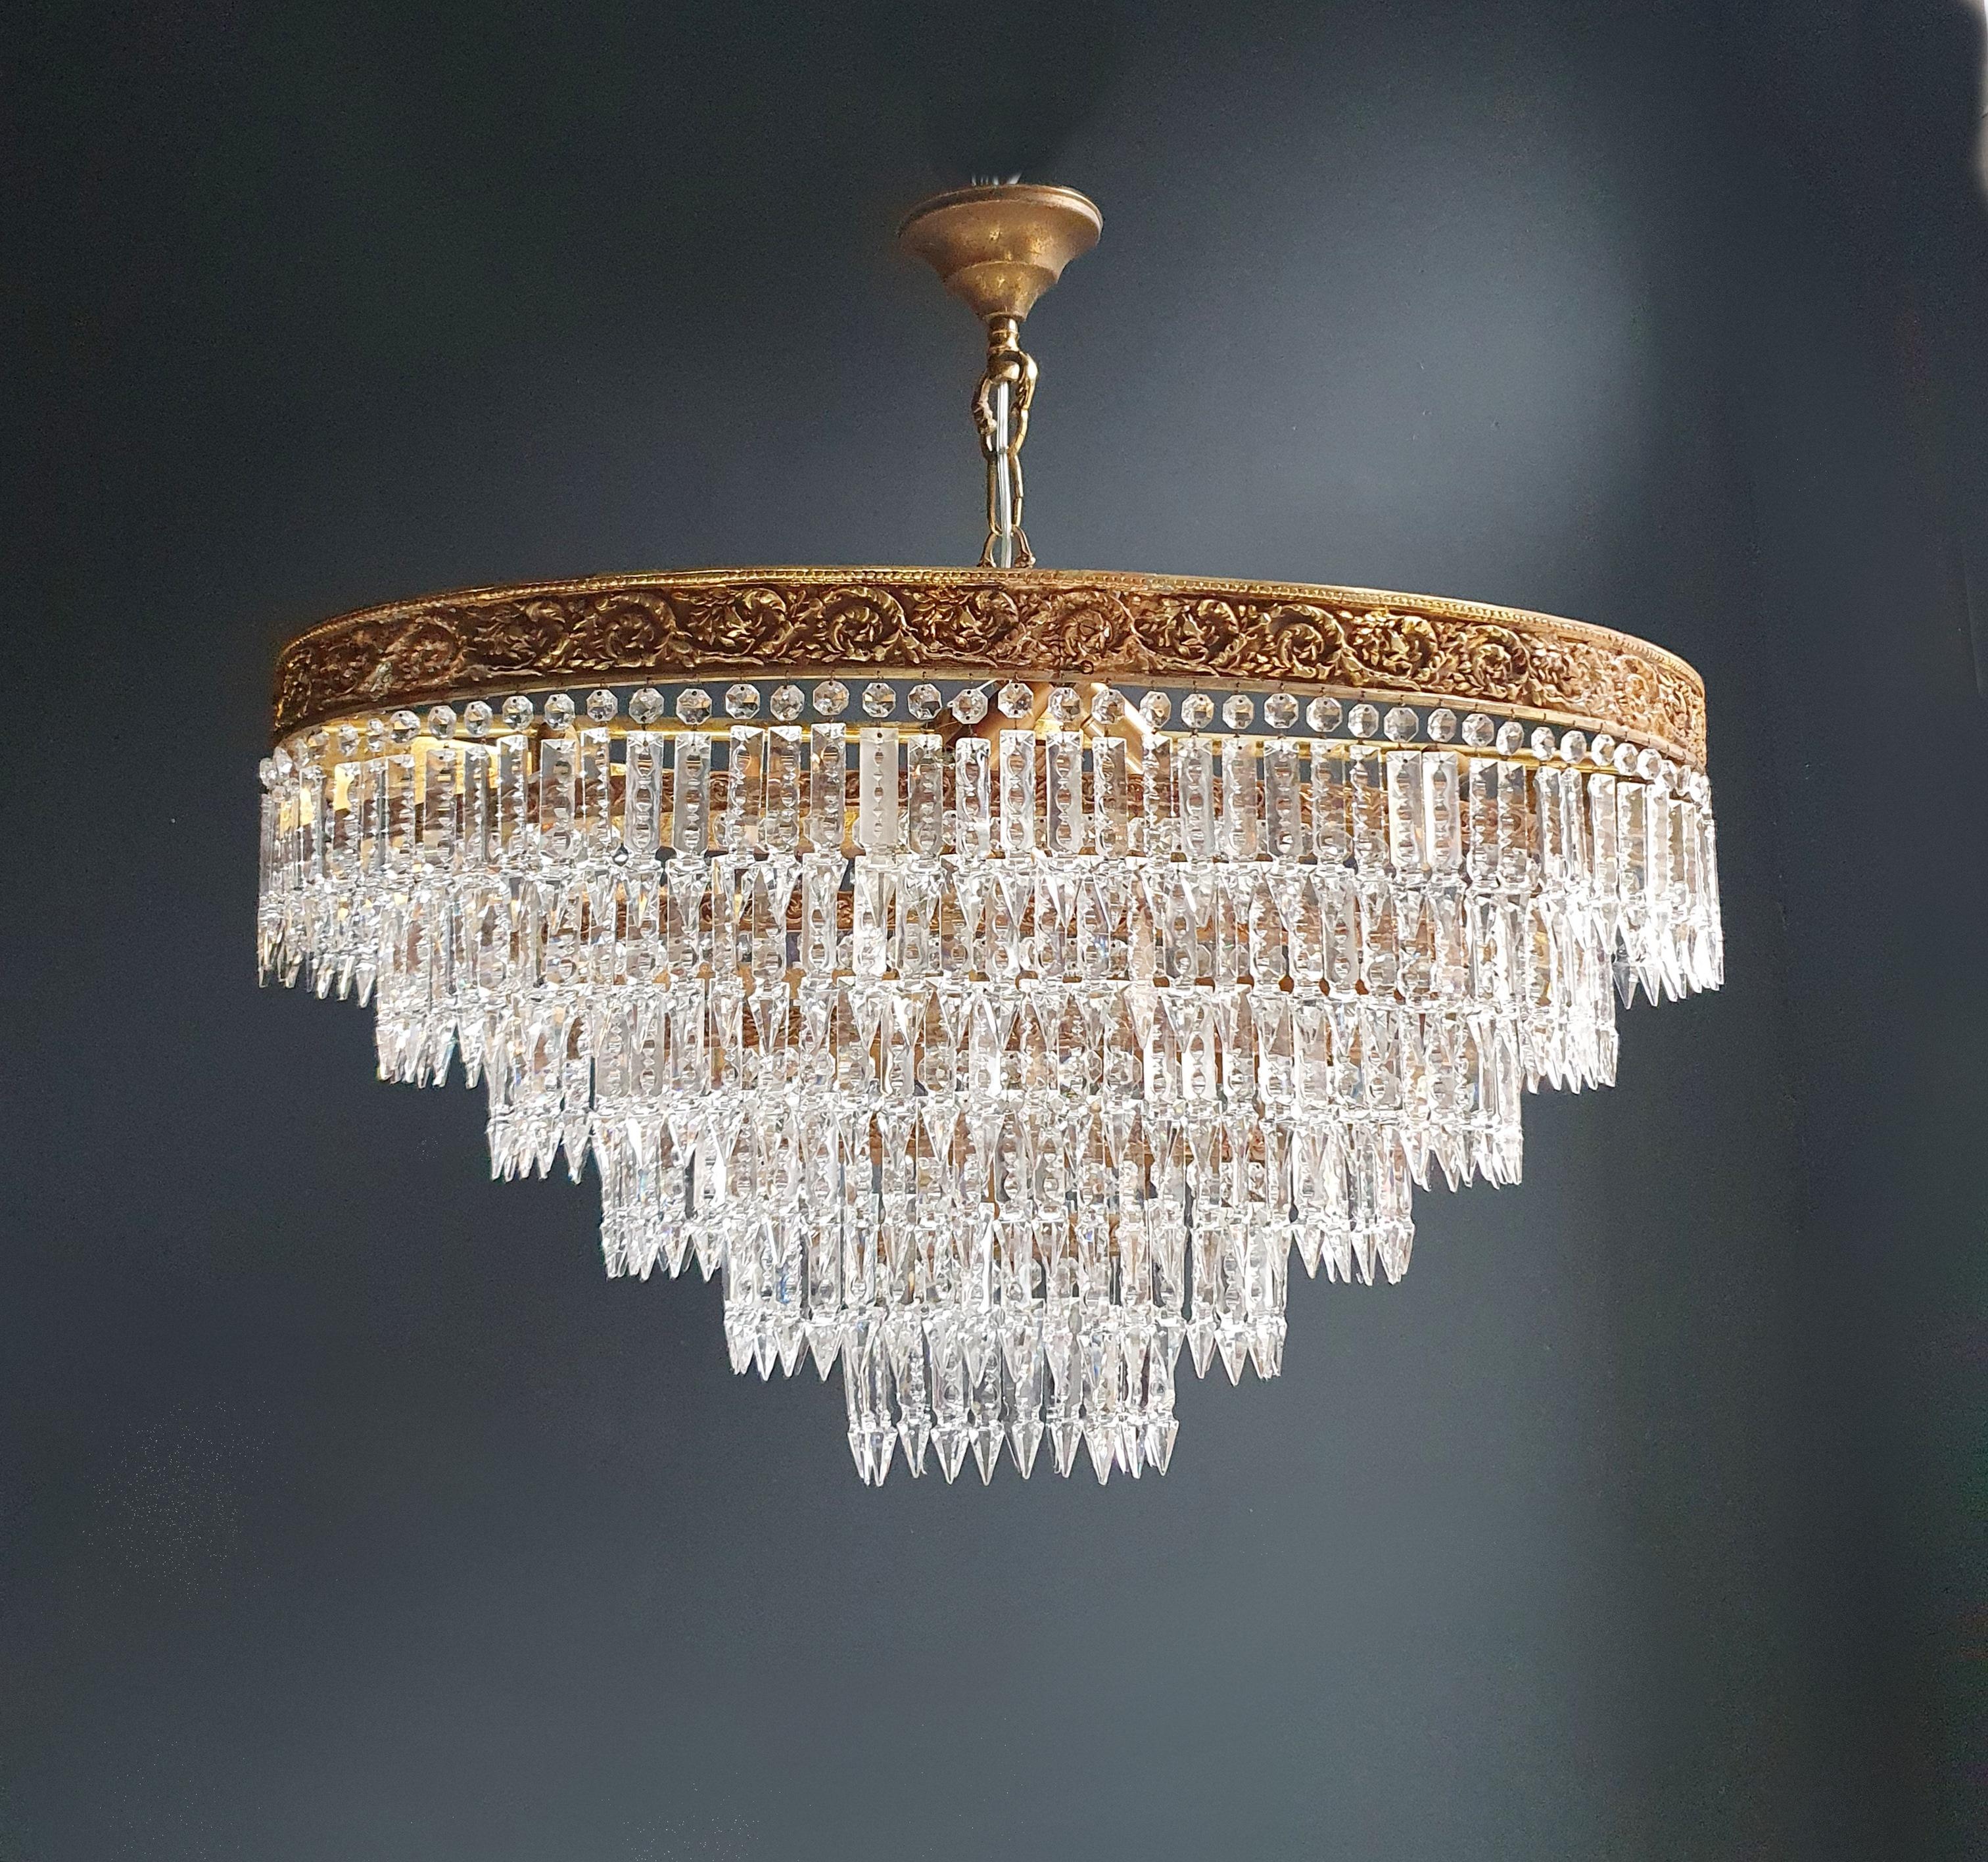 Low oval ceiling crystal chandelier brass.
Cabling completely renewed. Crystal hand knotted.
Measures: Total height 75 cm, height without chain 46 cm, diameter 80 x 50 cm. weight (approximately) 17kg.

Number of lights: 8-light bulb sockets: